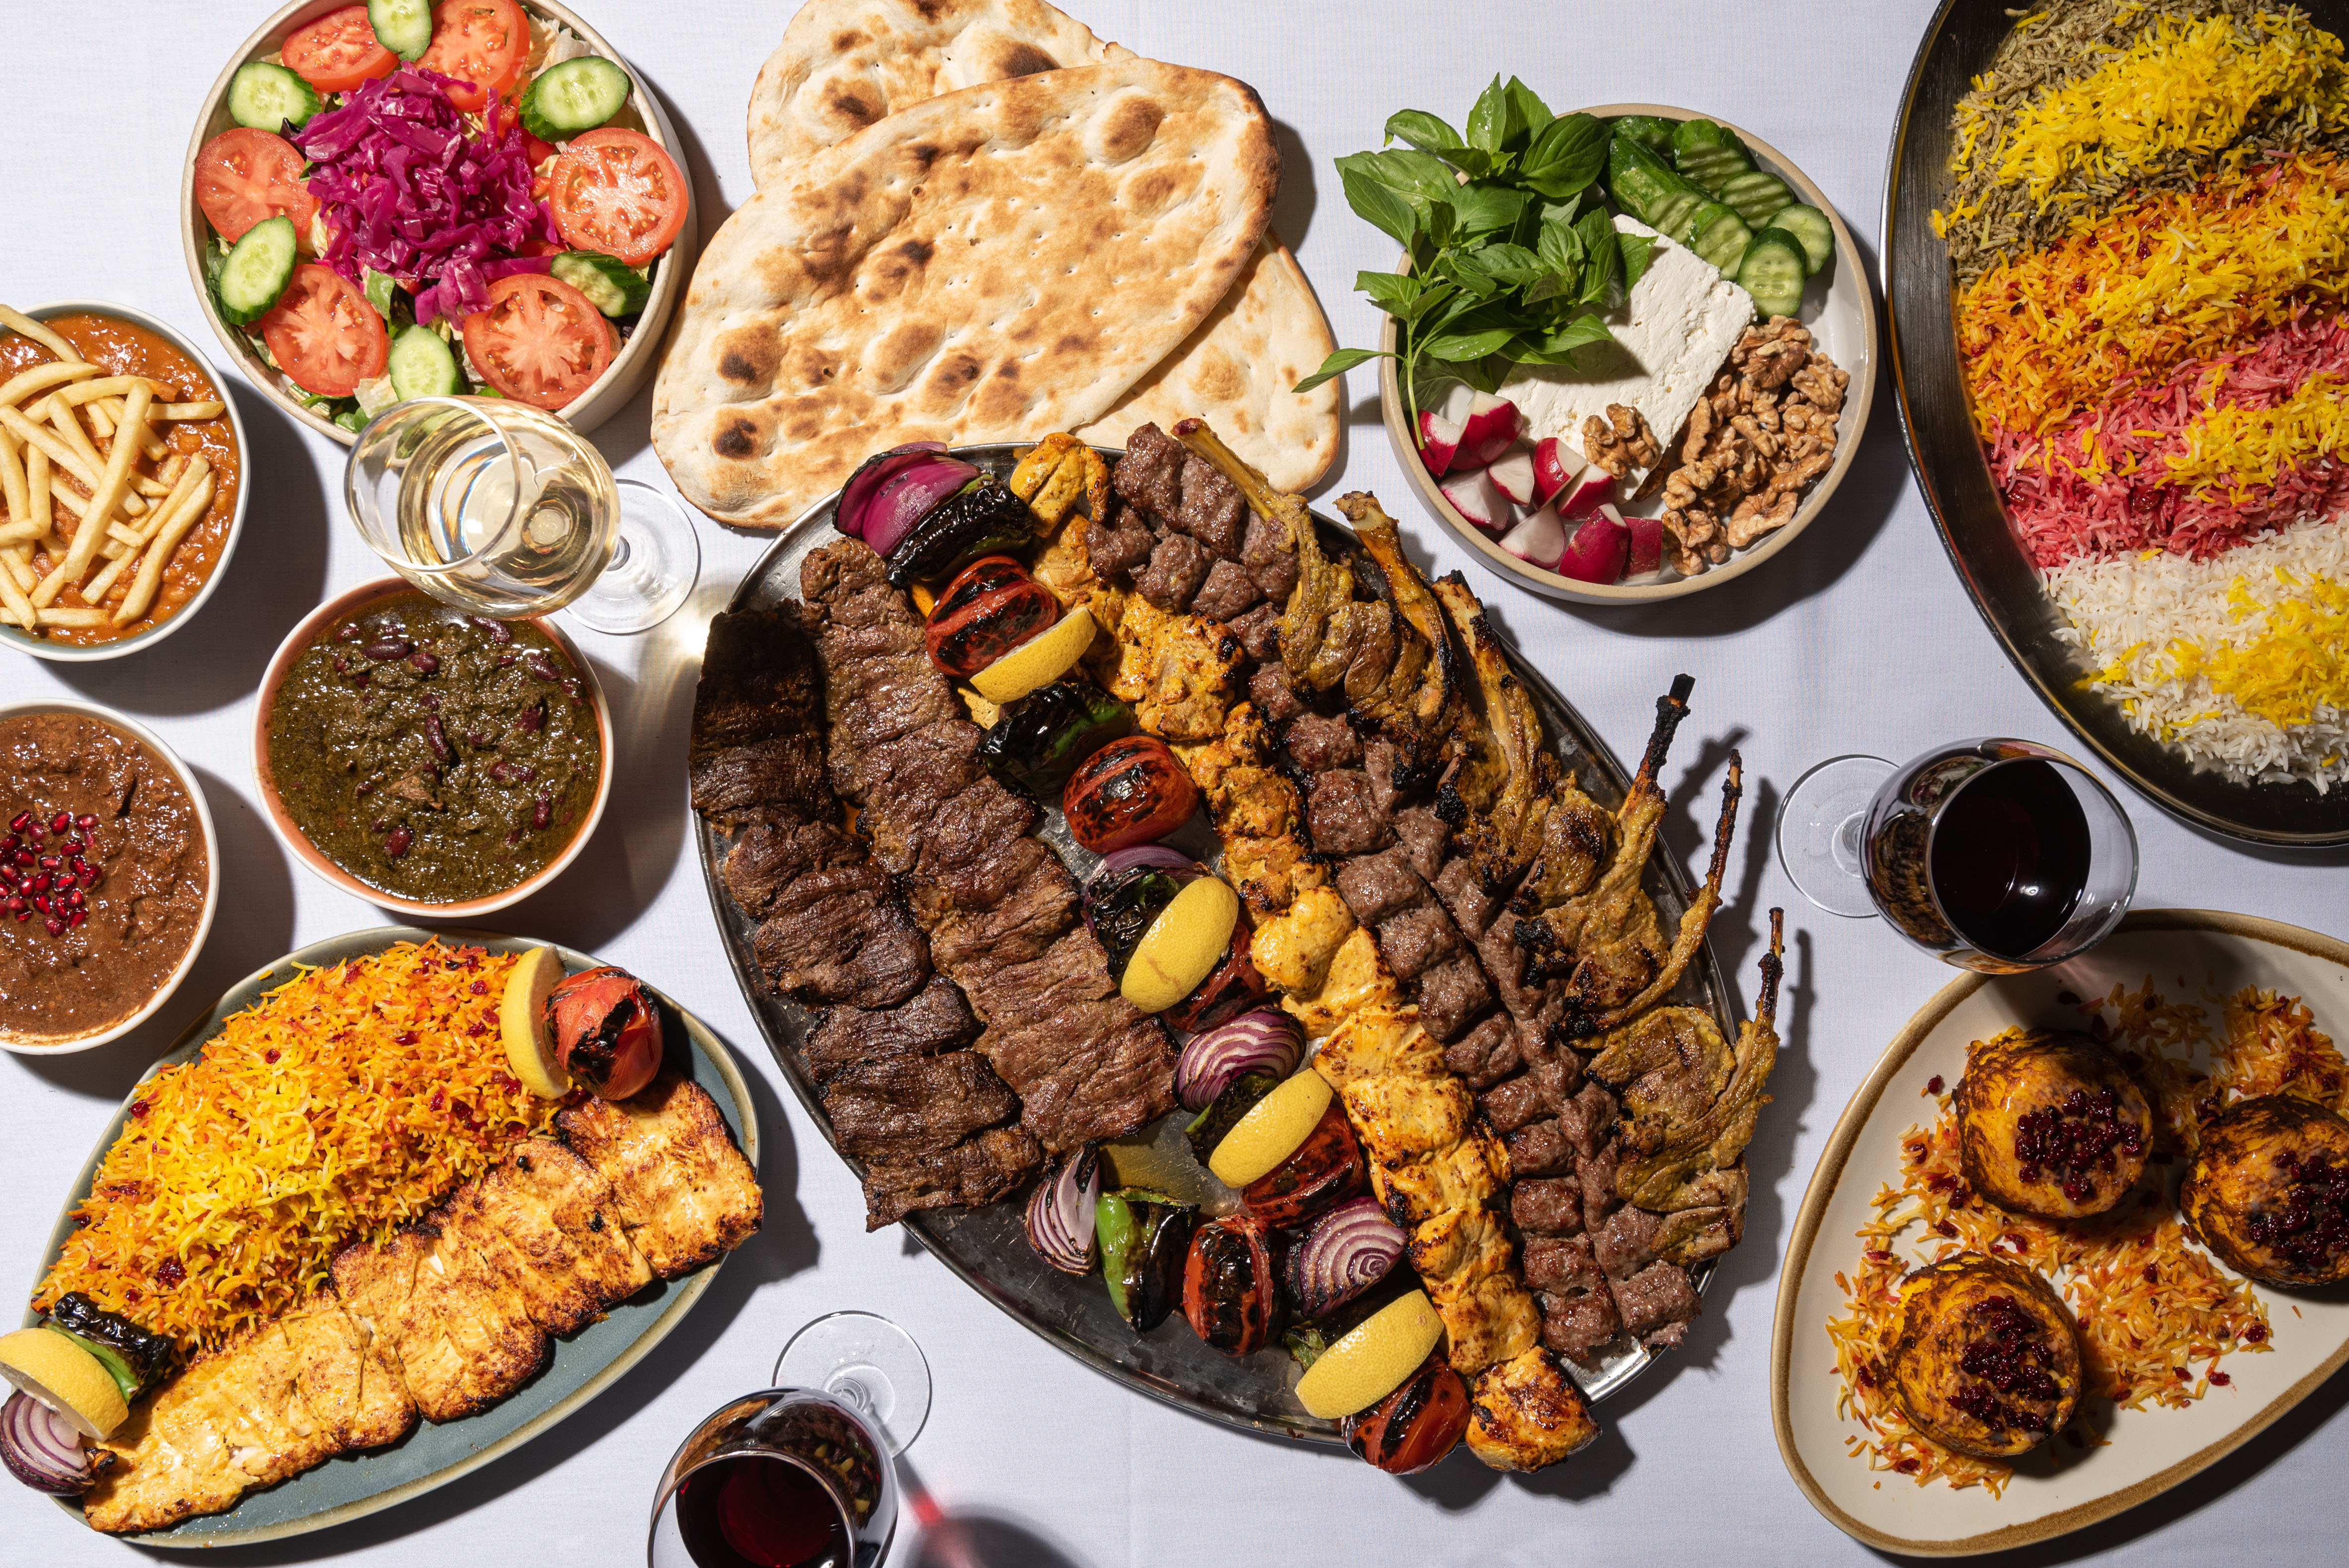 Kebabs, flatbread, salads, and pilafs from Pardis in Glendale.